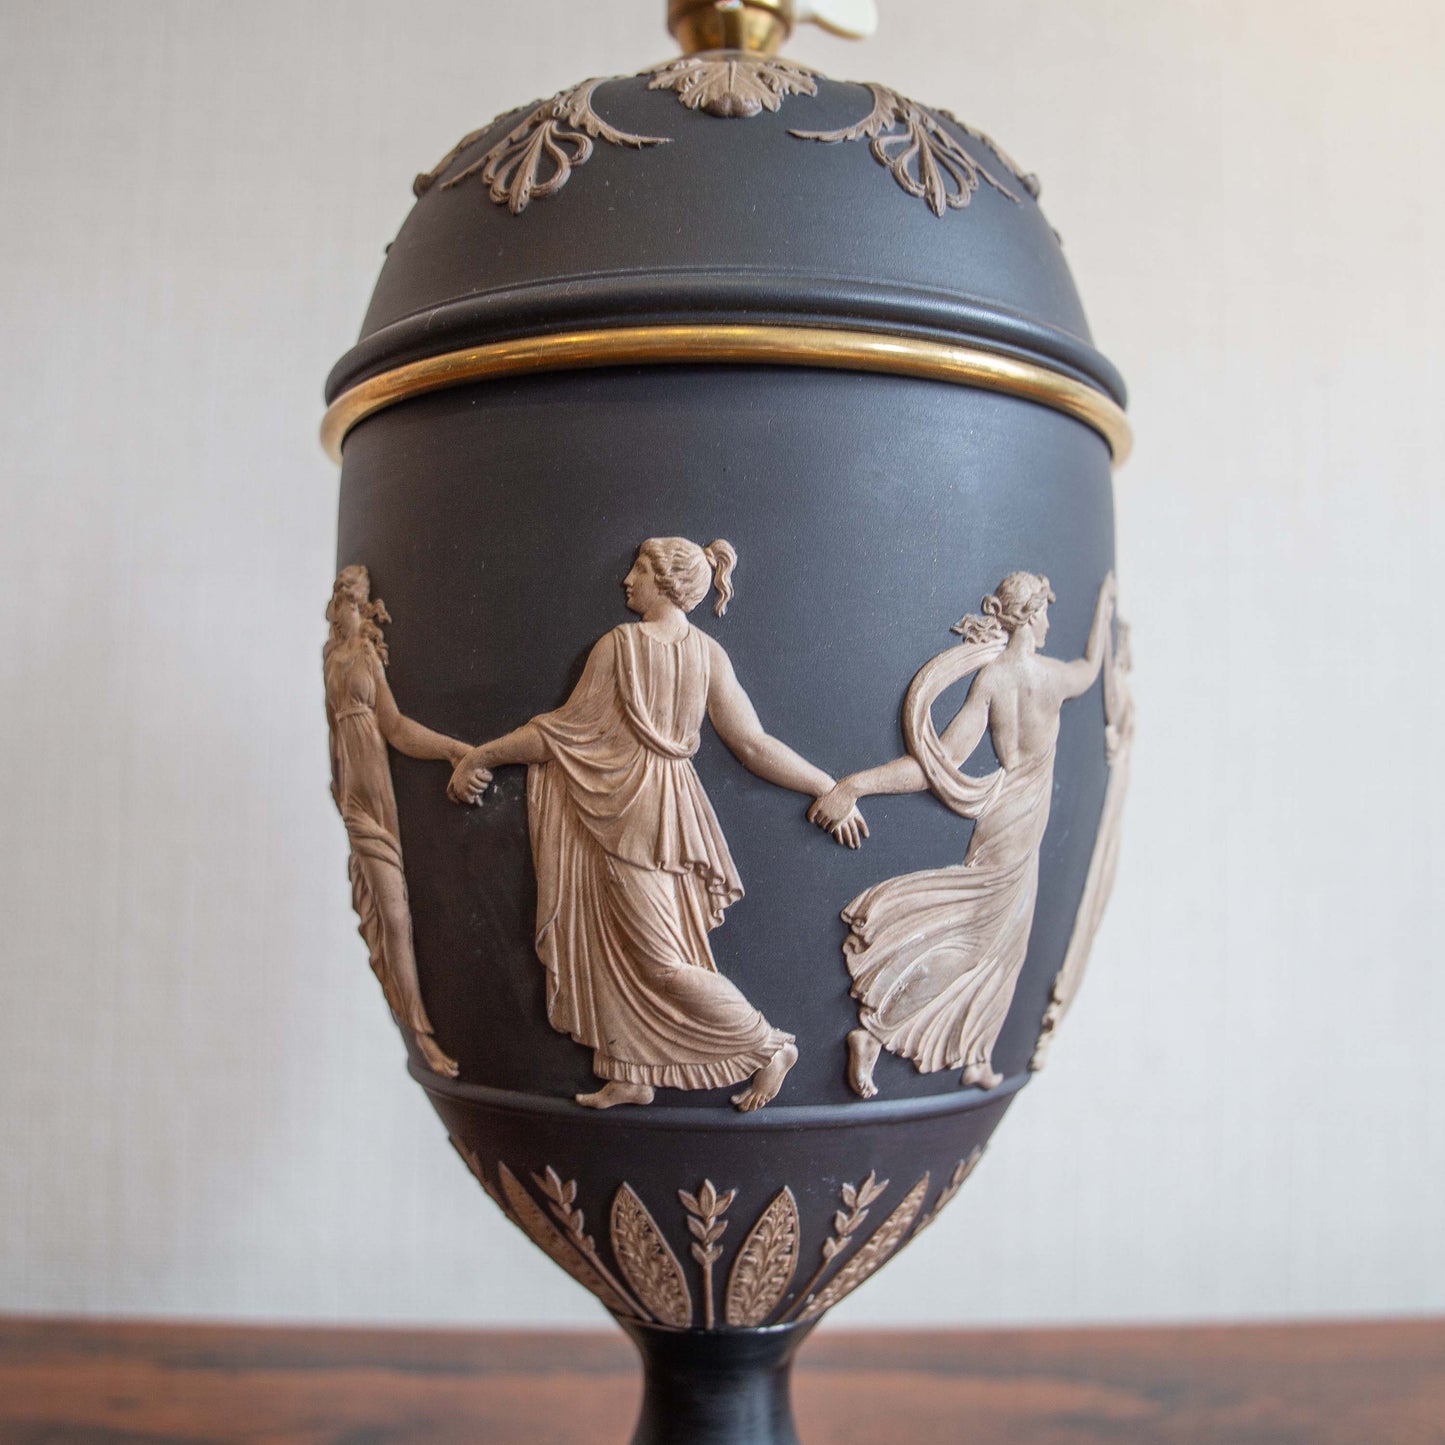 A Classically Decorated Wedgwood Vase as a Lamp